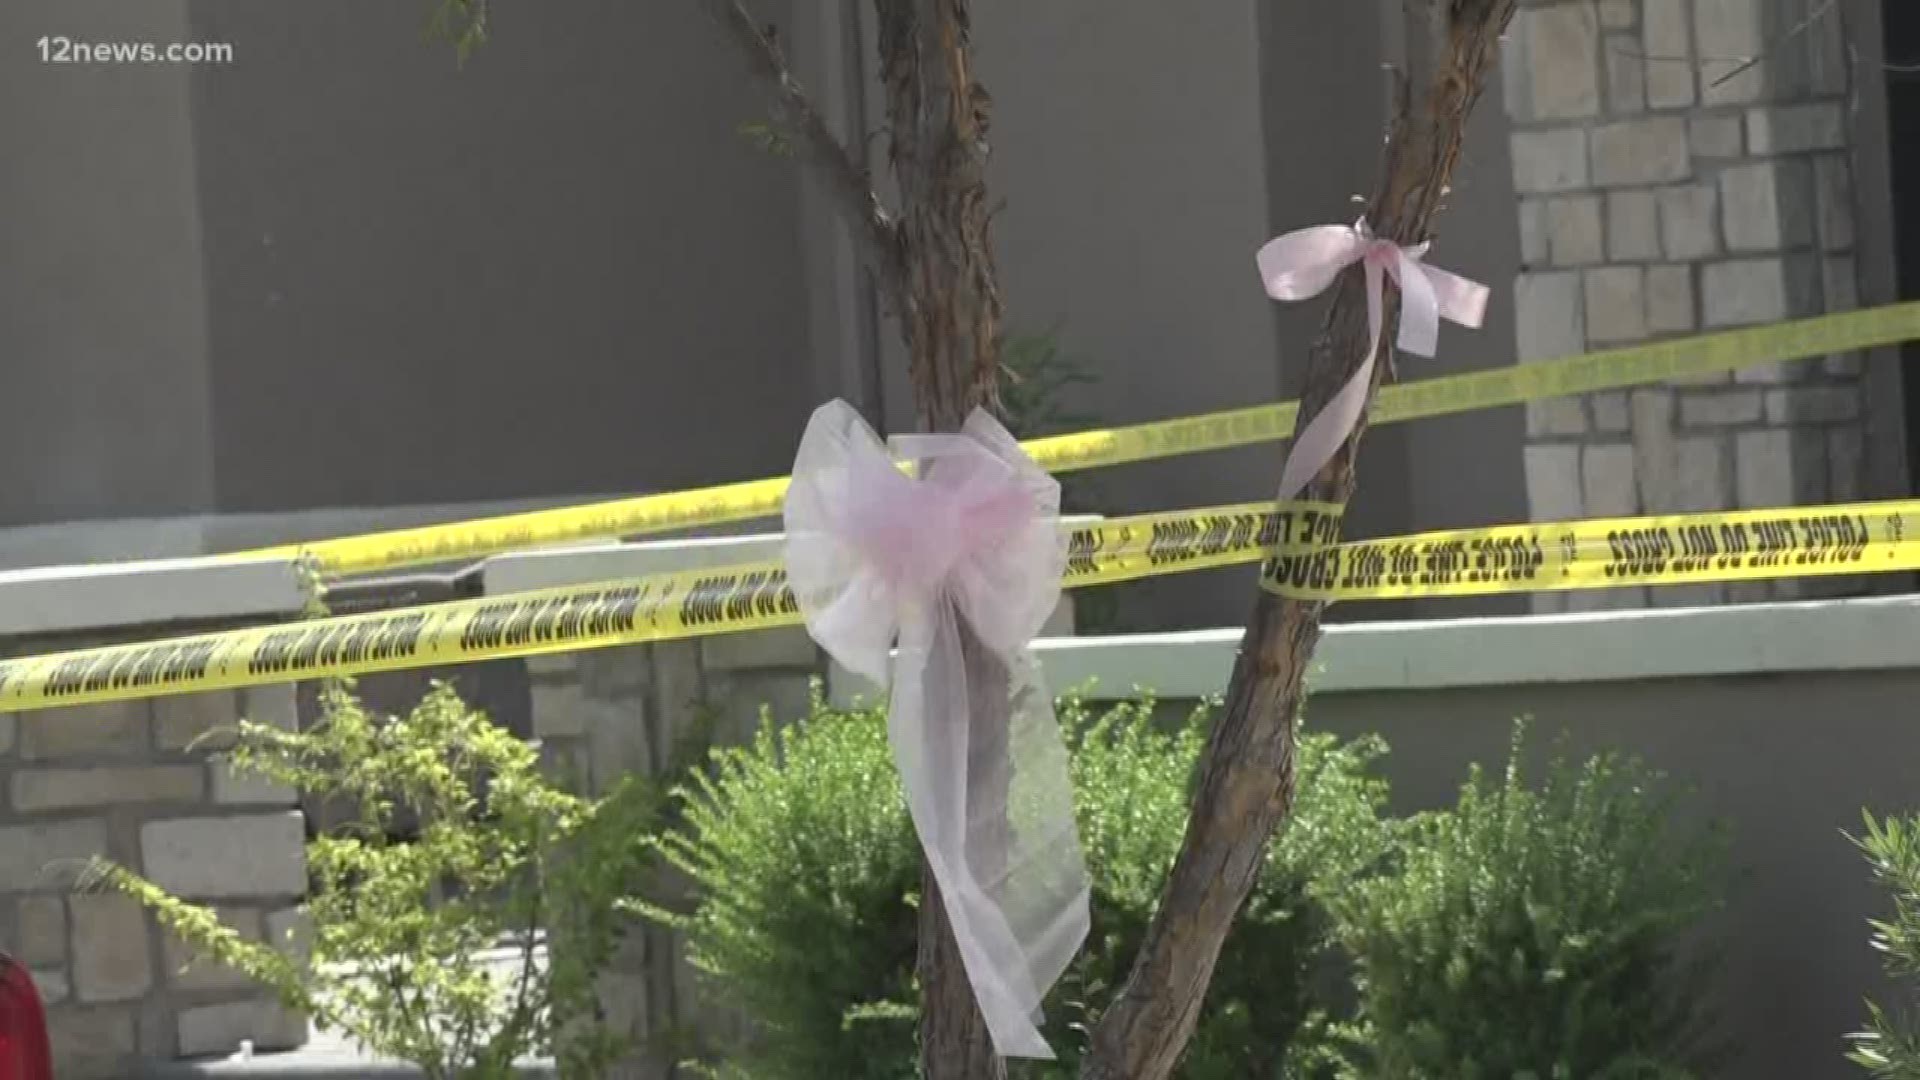 A neighborhood continues to mourn the death of a 3-year-old Gilbert girl who died yesterday after being left inside a hot car for almost three hours. The tragedy is bringing out the best in neighbors who want the family to know they are with the family that lost the little girl.